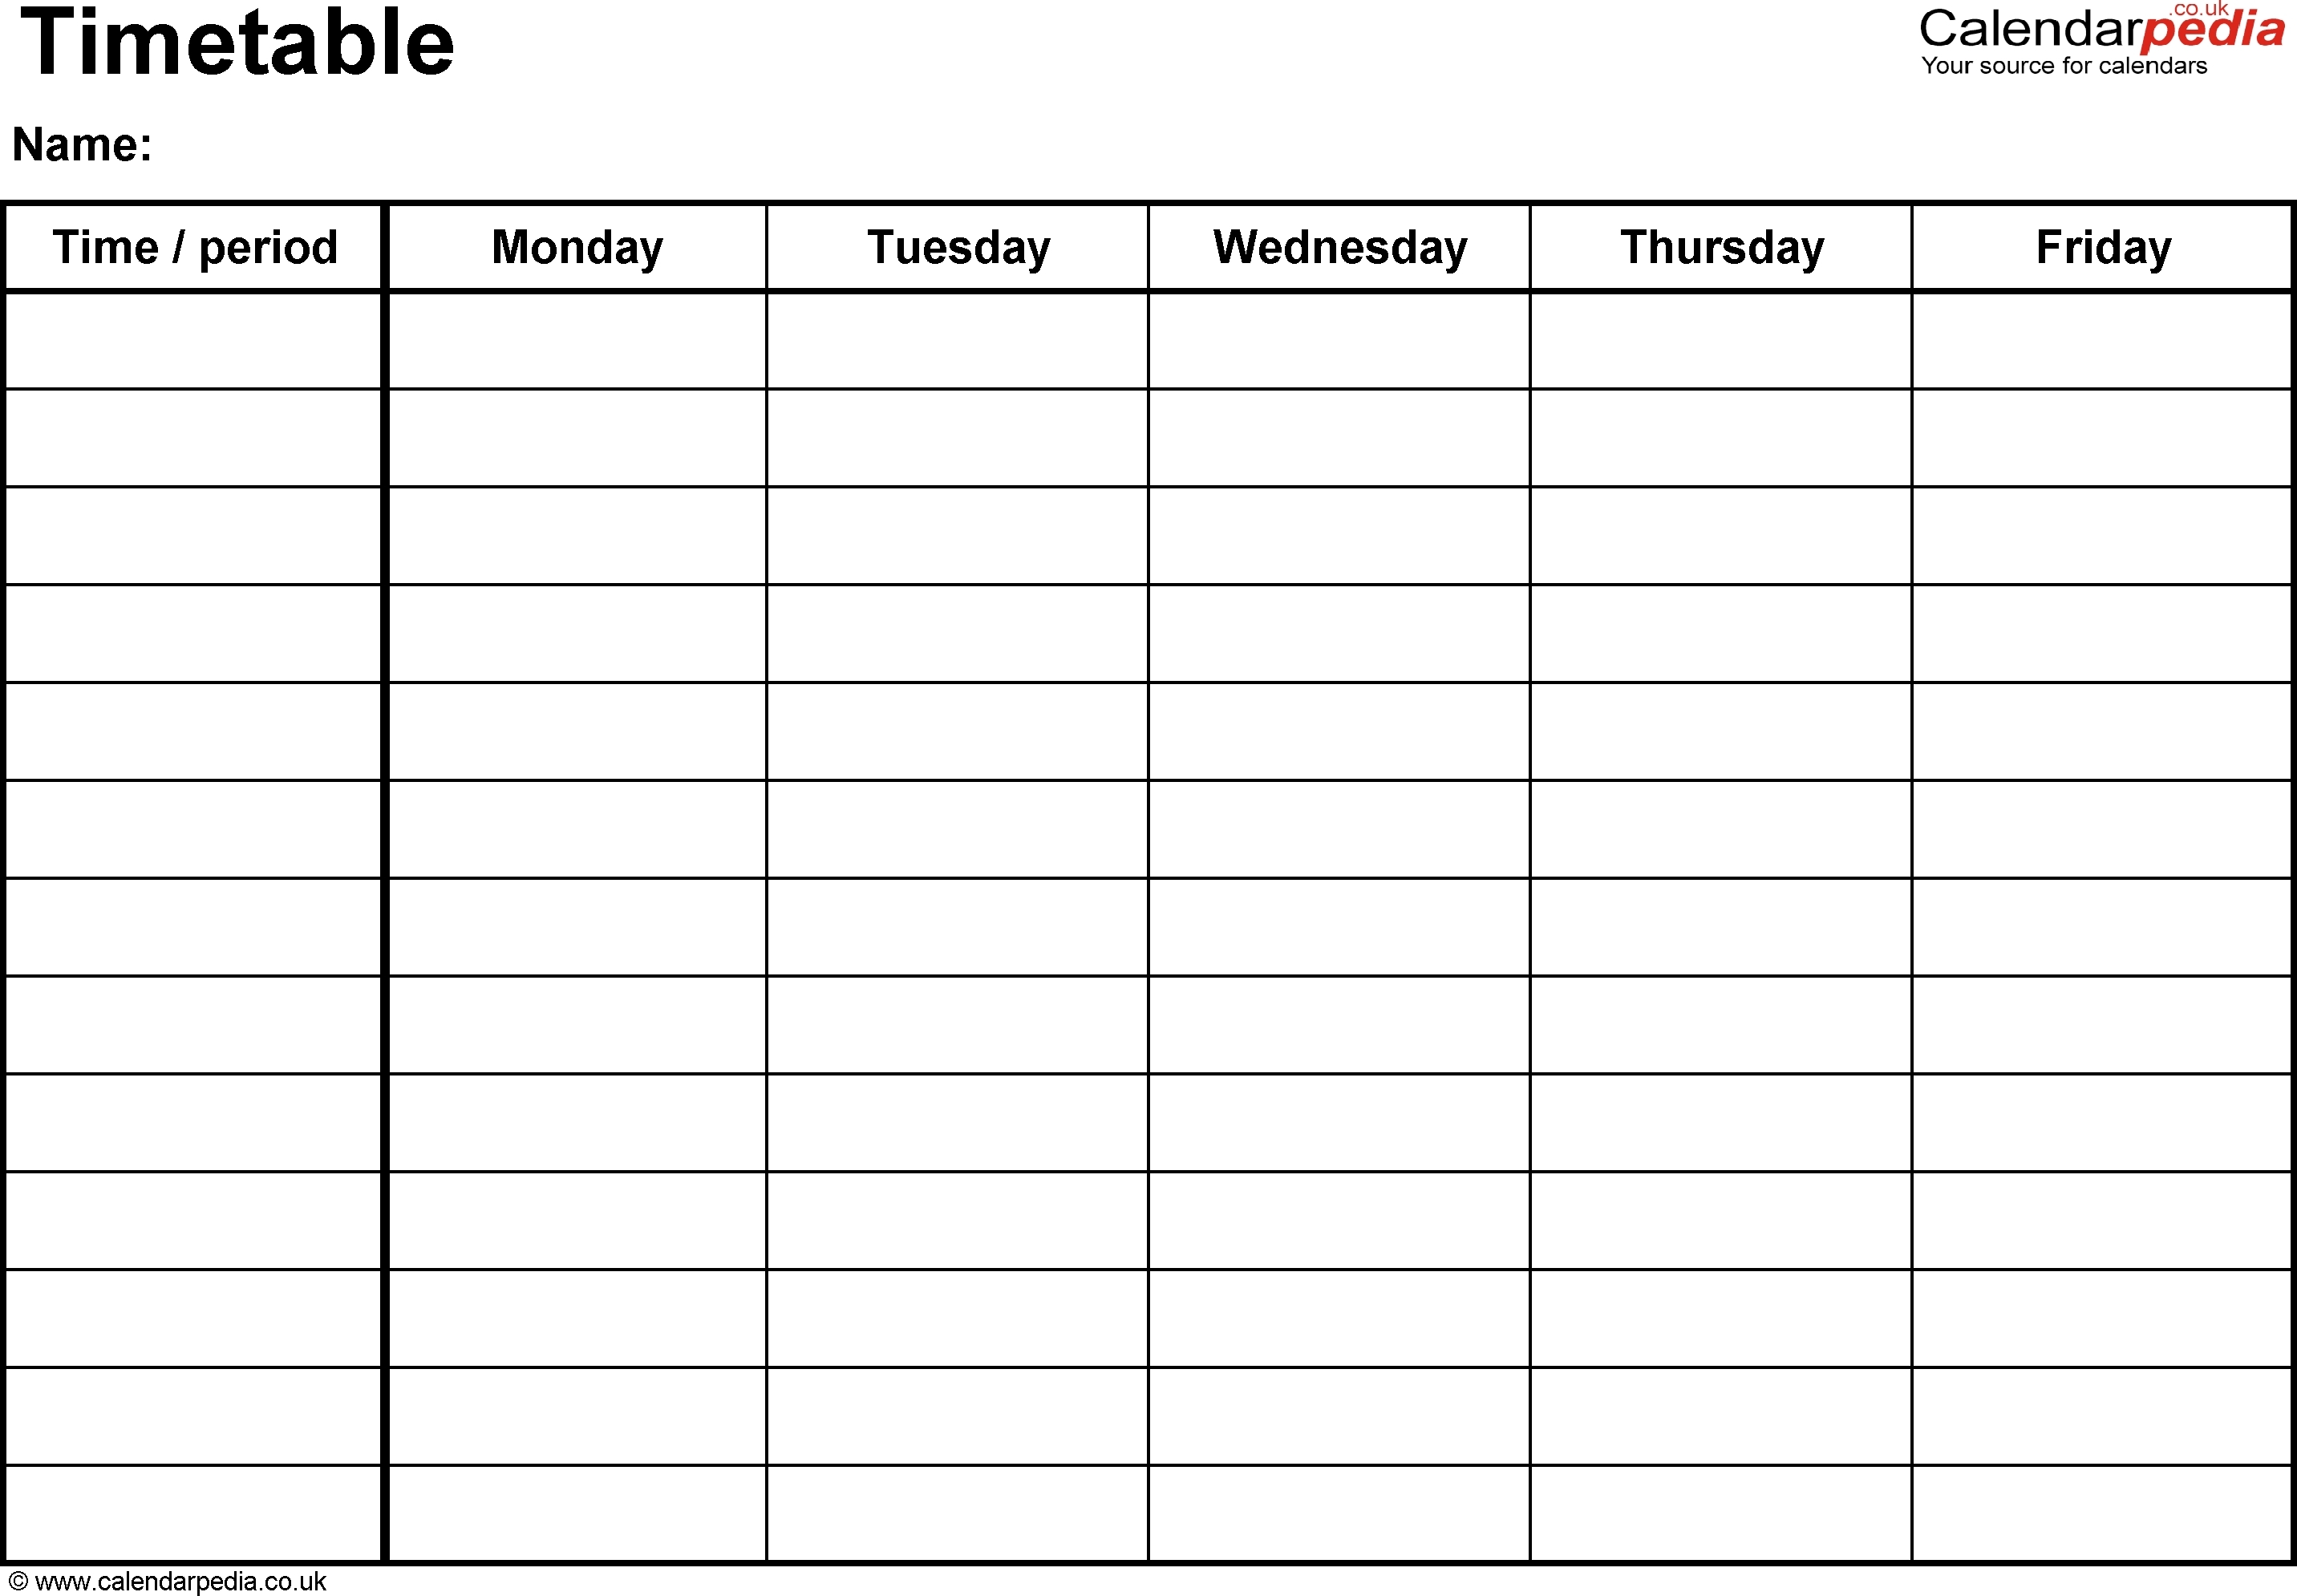 Monday To Friday Timetable Template | Calendar Printing Example-Template Monday To Friday